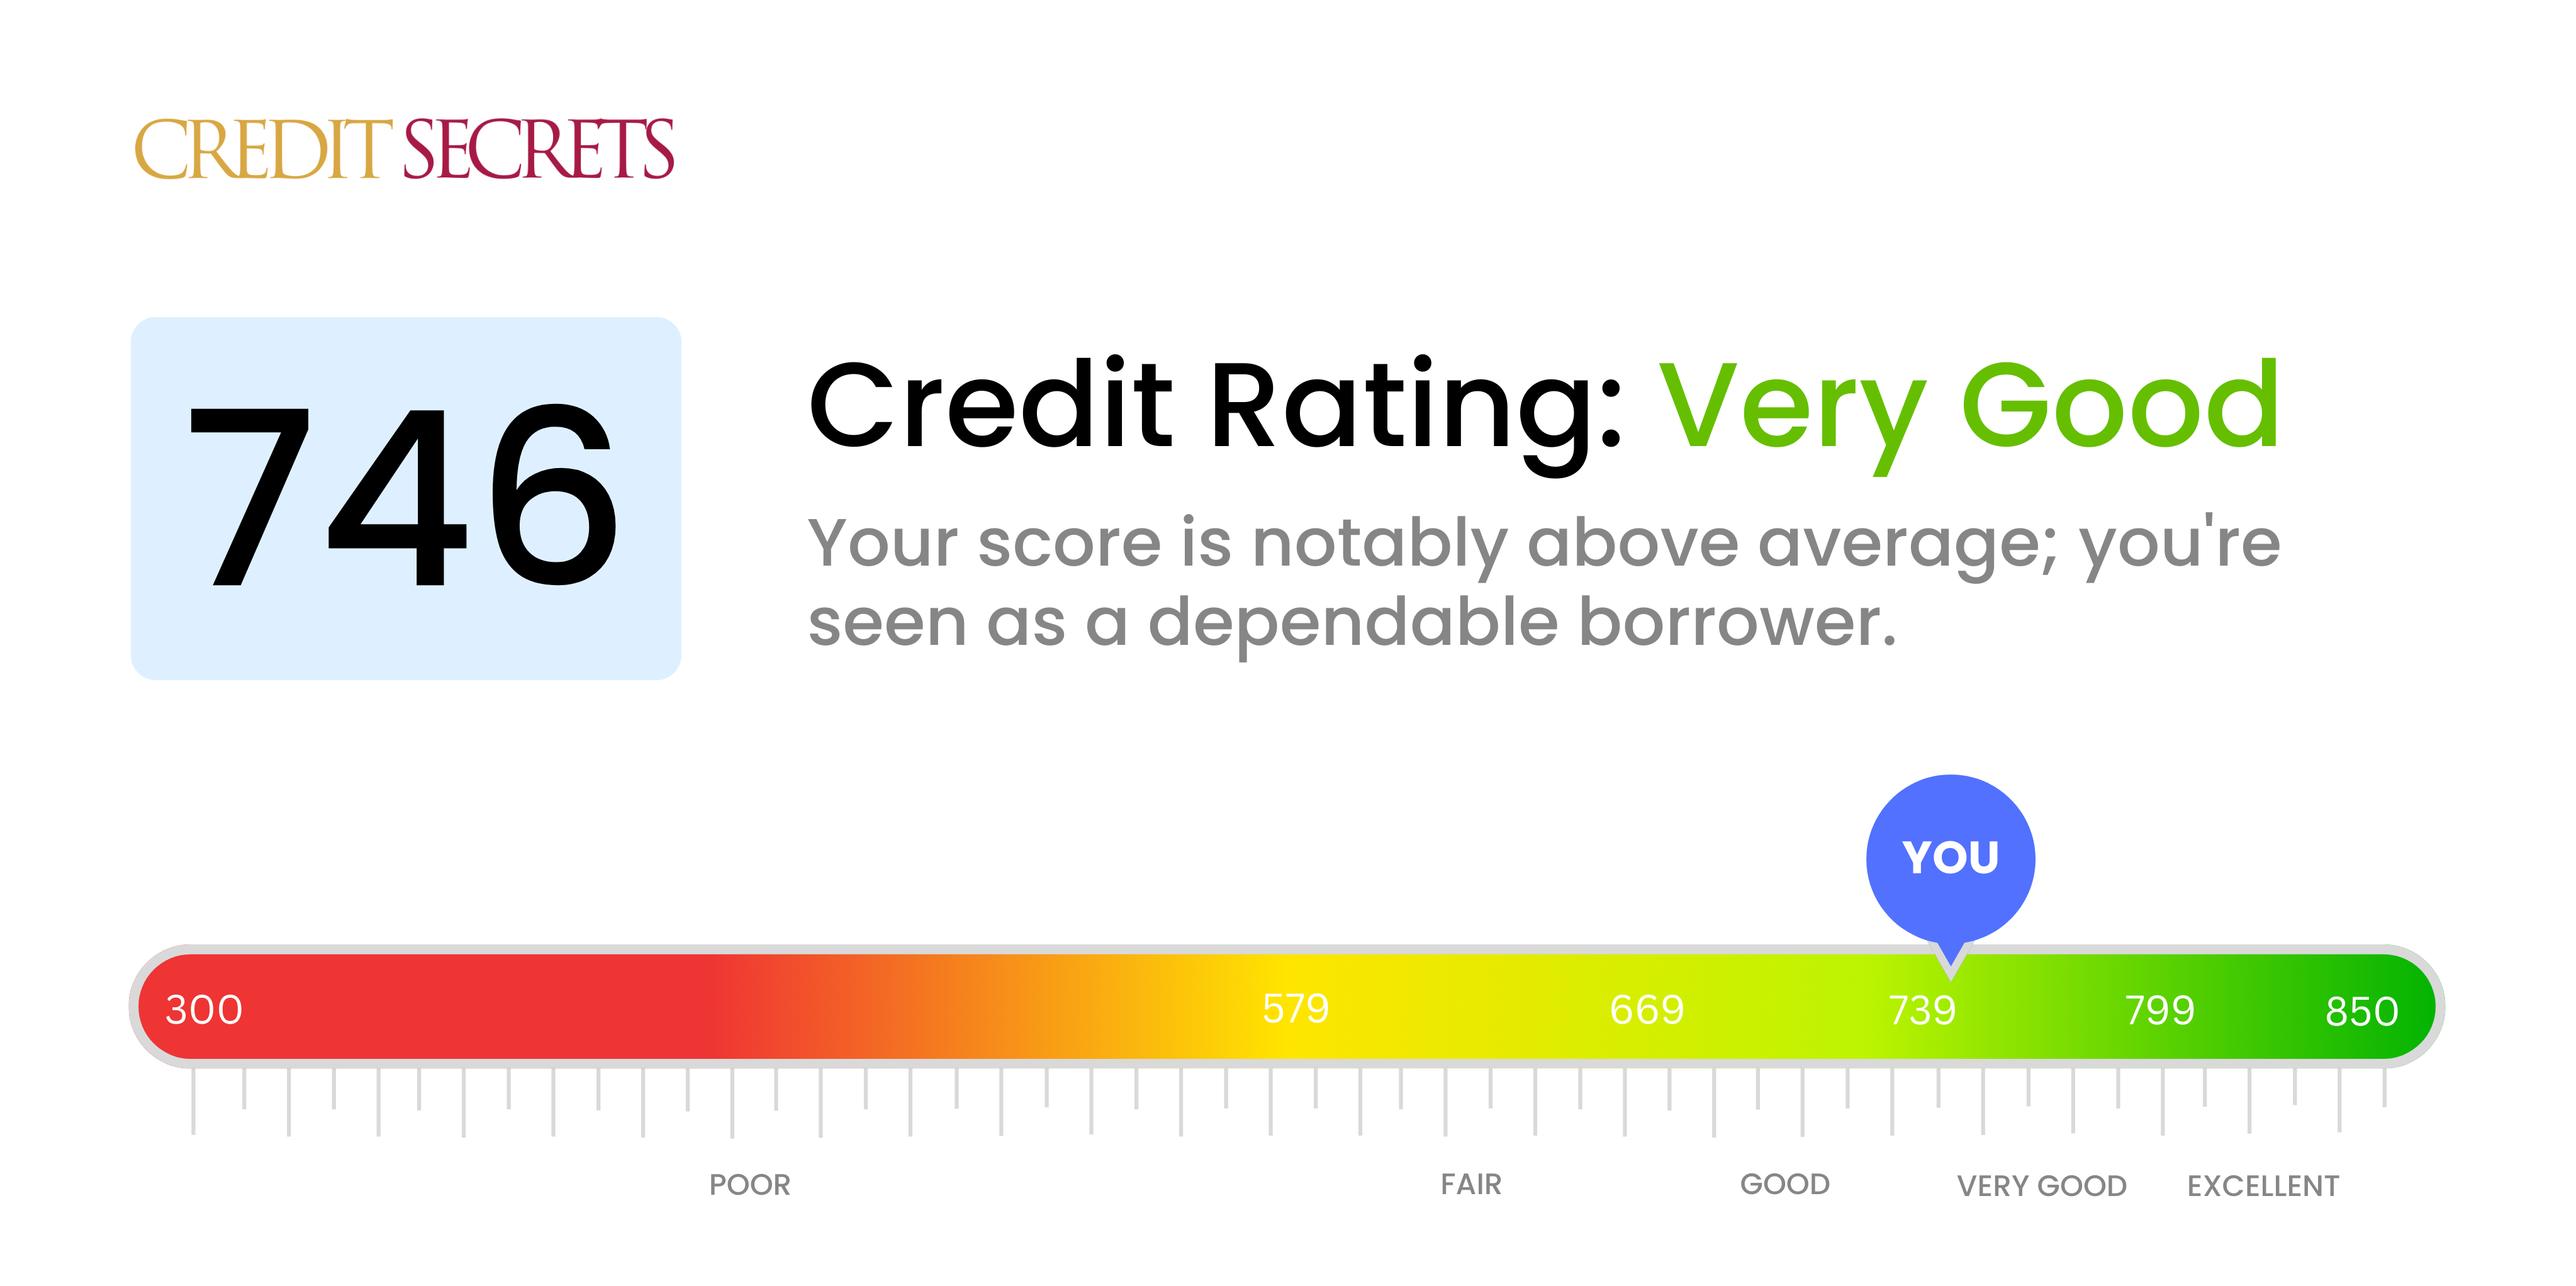 Is 746 a good credit score?